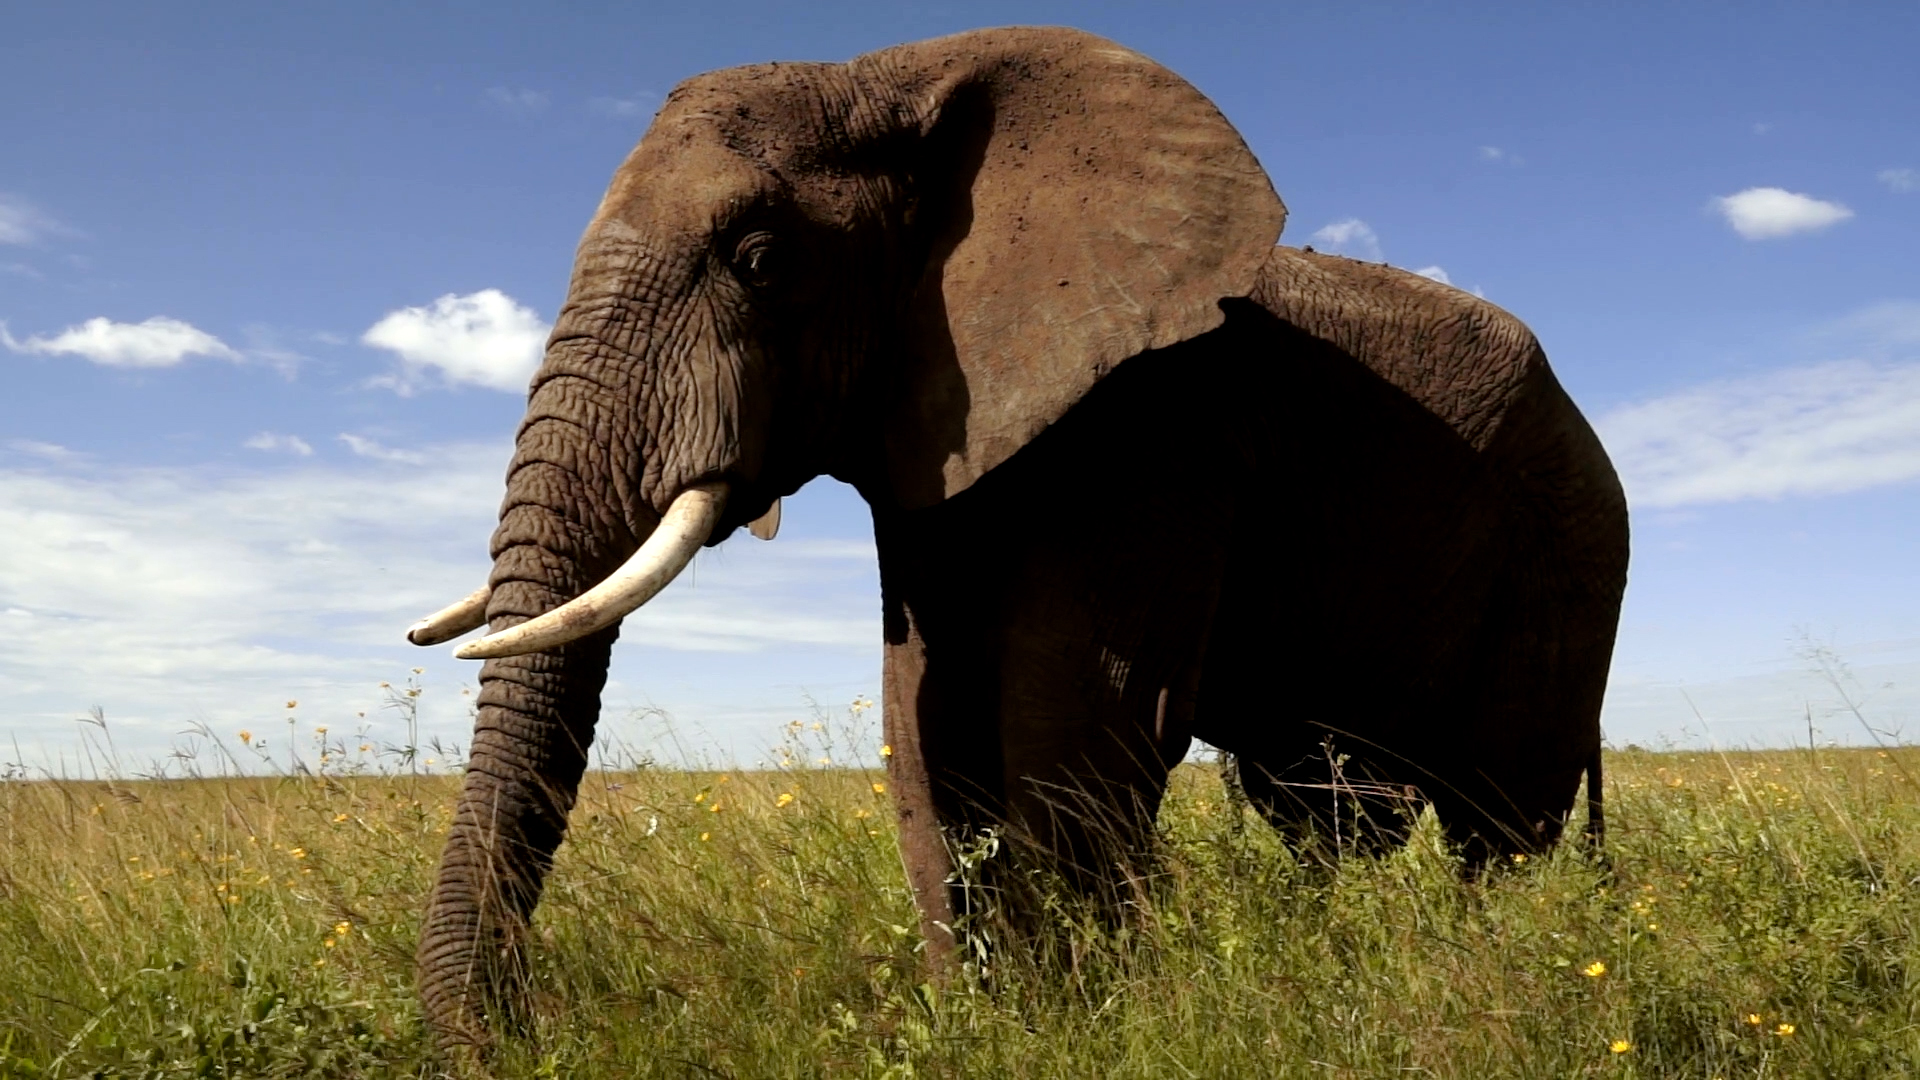 An elephant standing in a grassy plain in front of a blue sky.